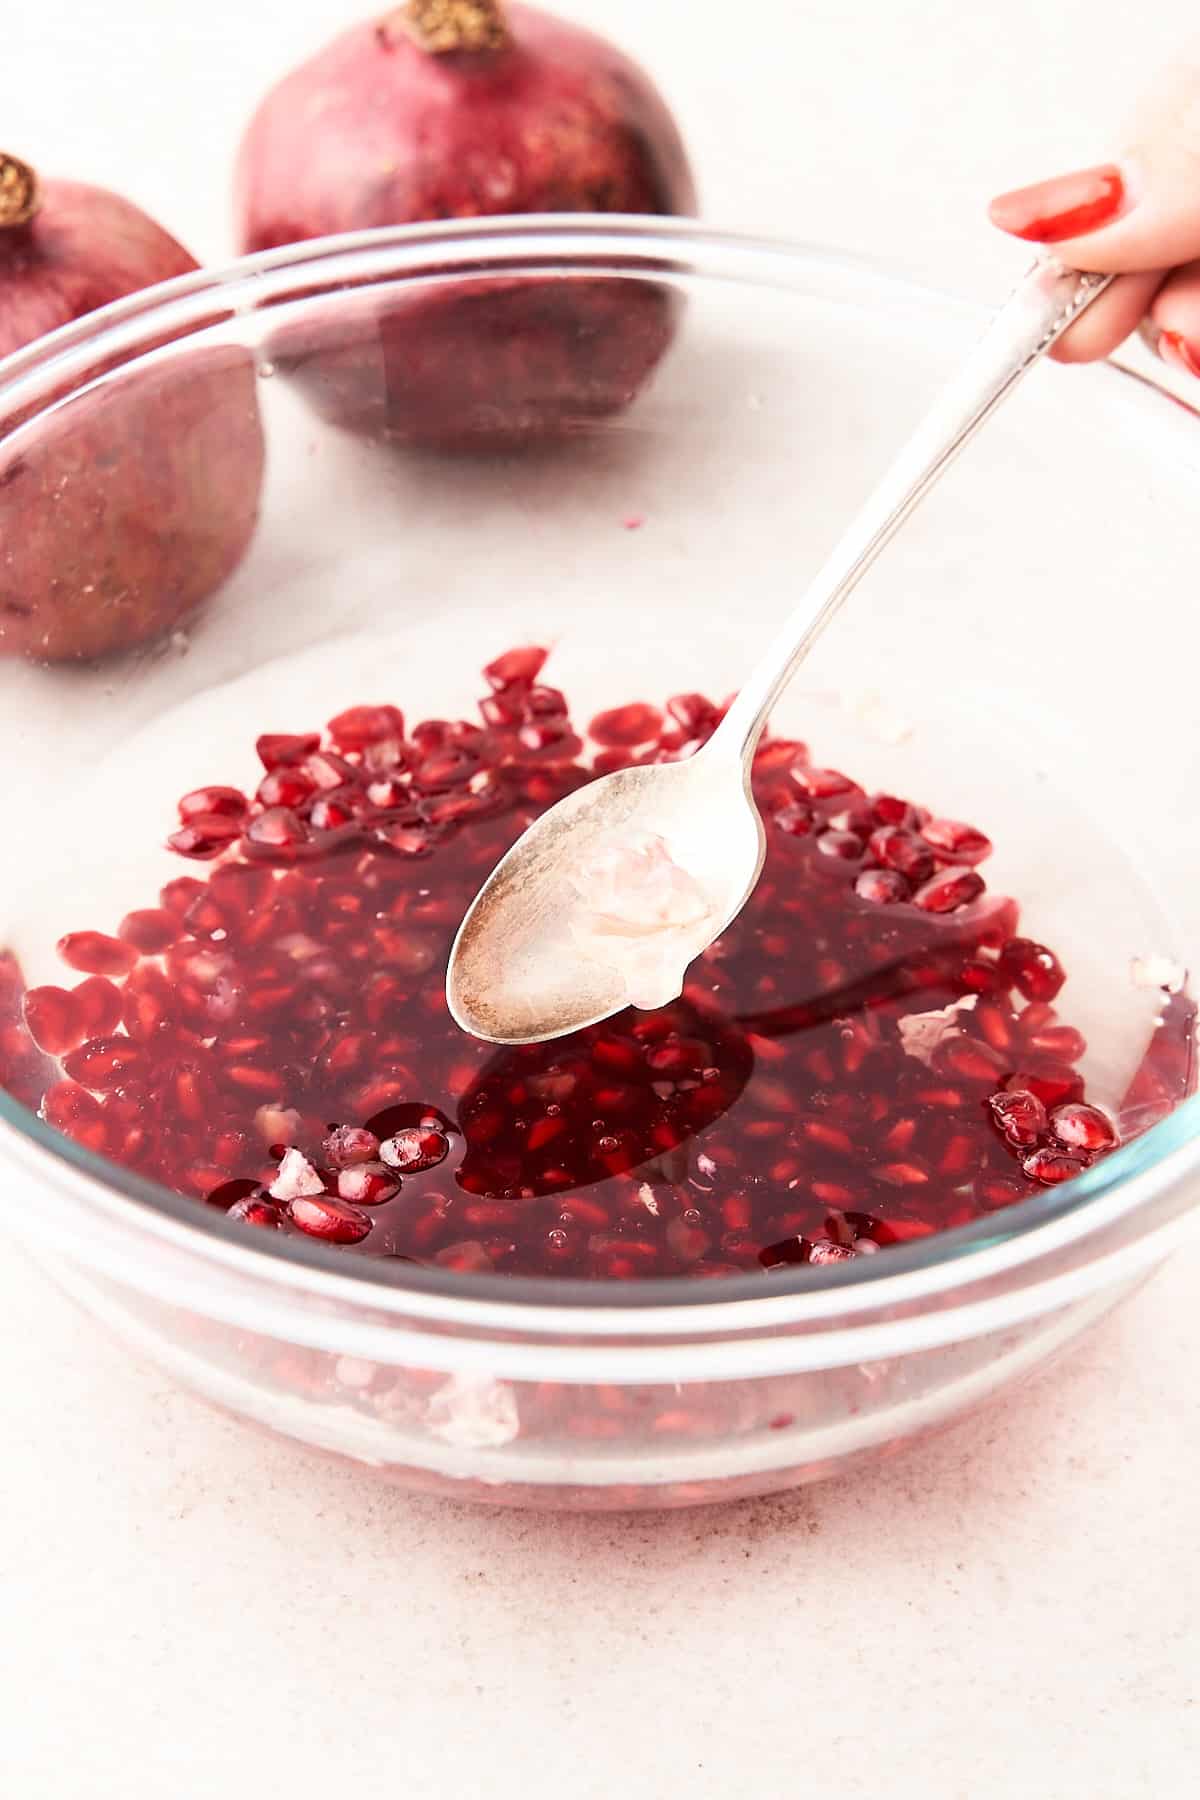 Scooping pomegranate membranes out of water.